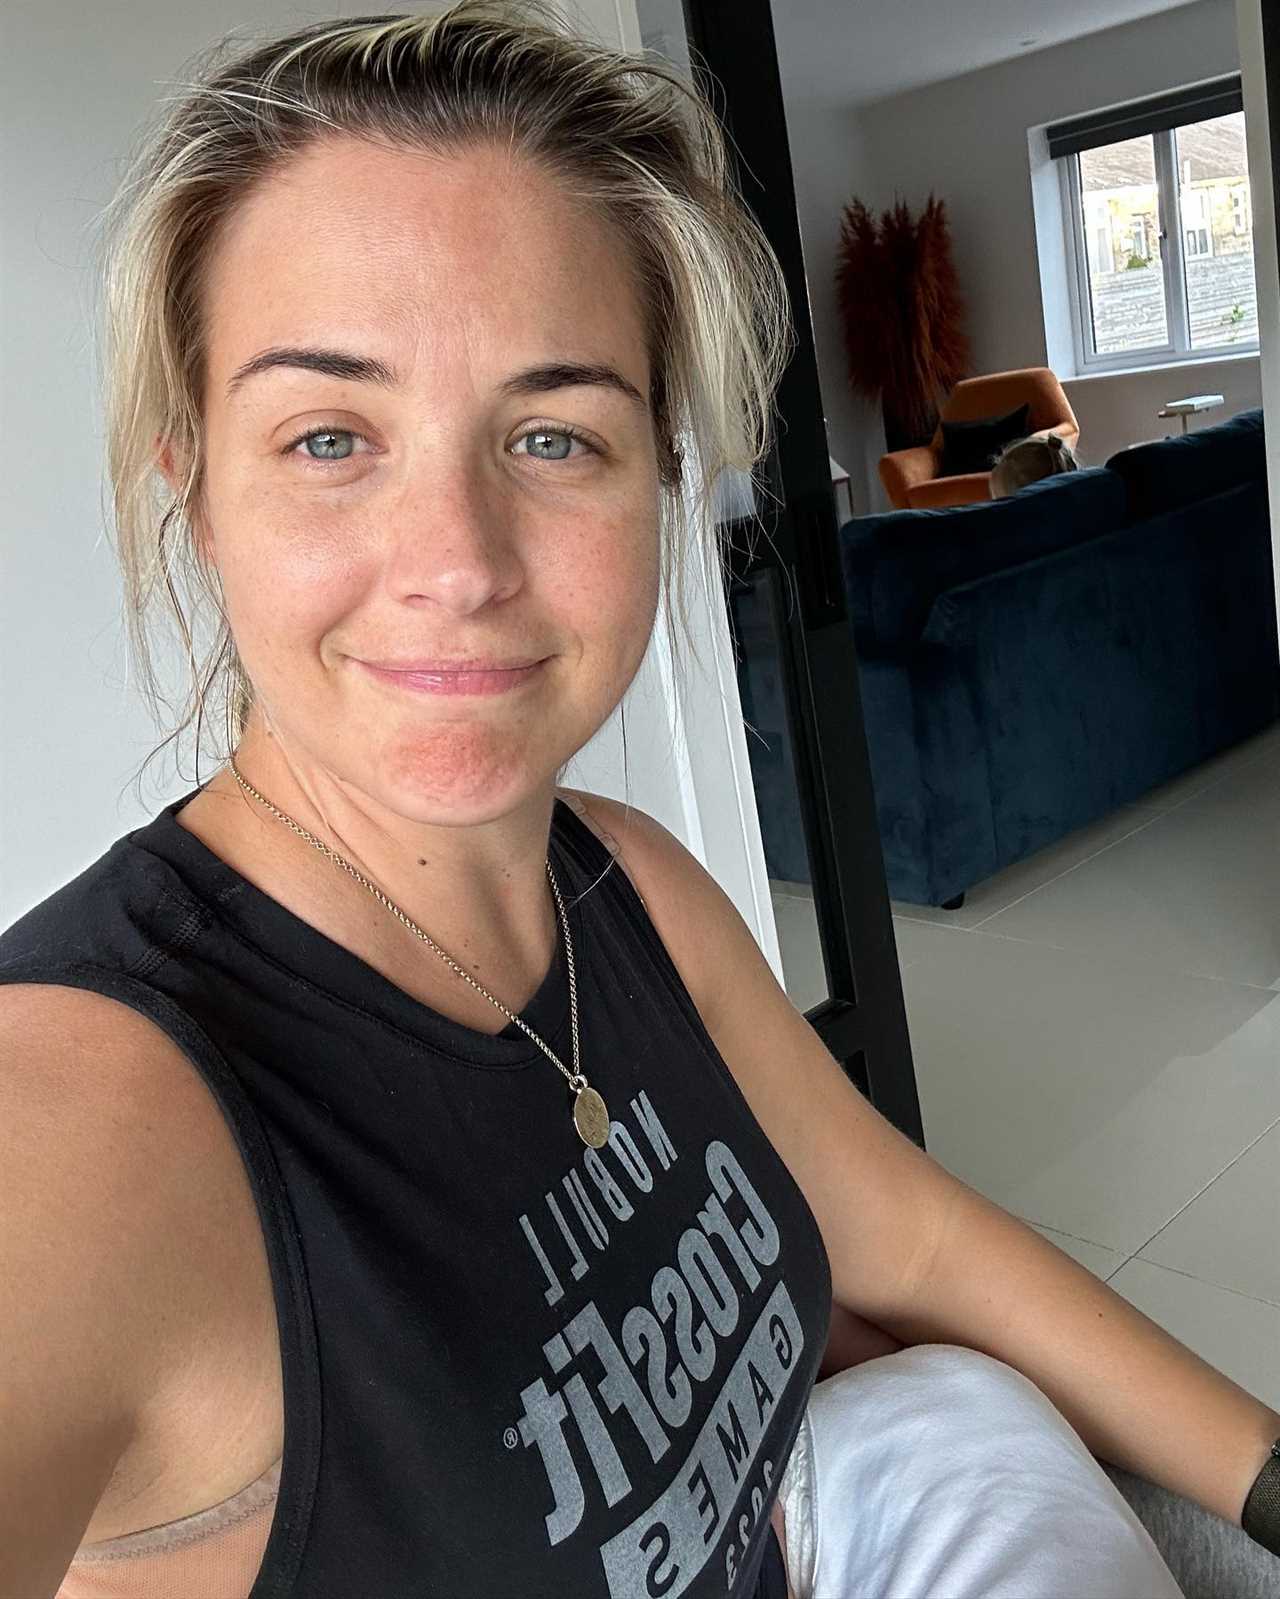 Gemma Atkinson Hits Back at Cruel Troll Who Says She 'Dresses Like a Boy' as She Shows off Post-Baby Body